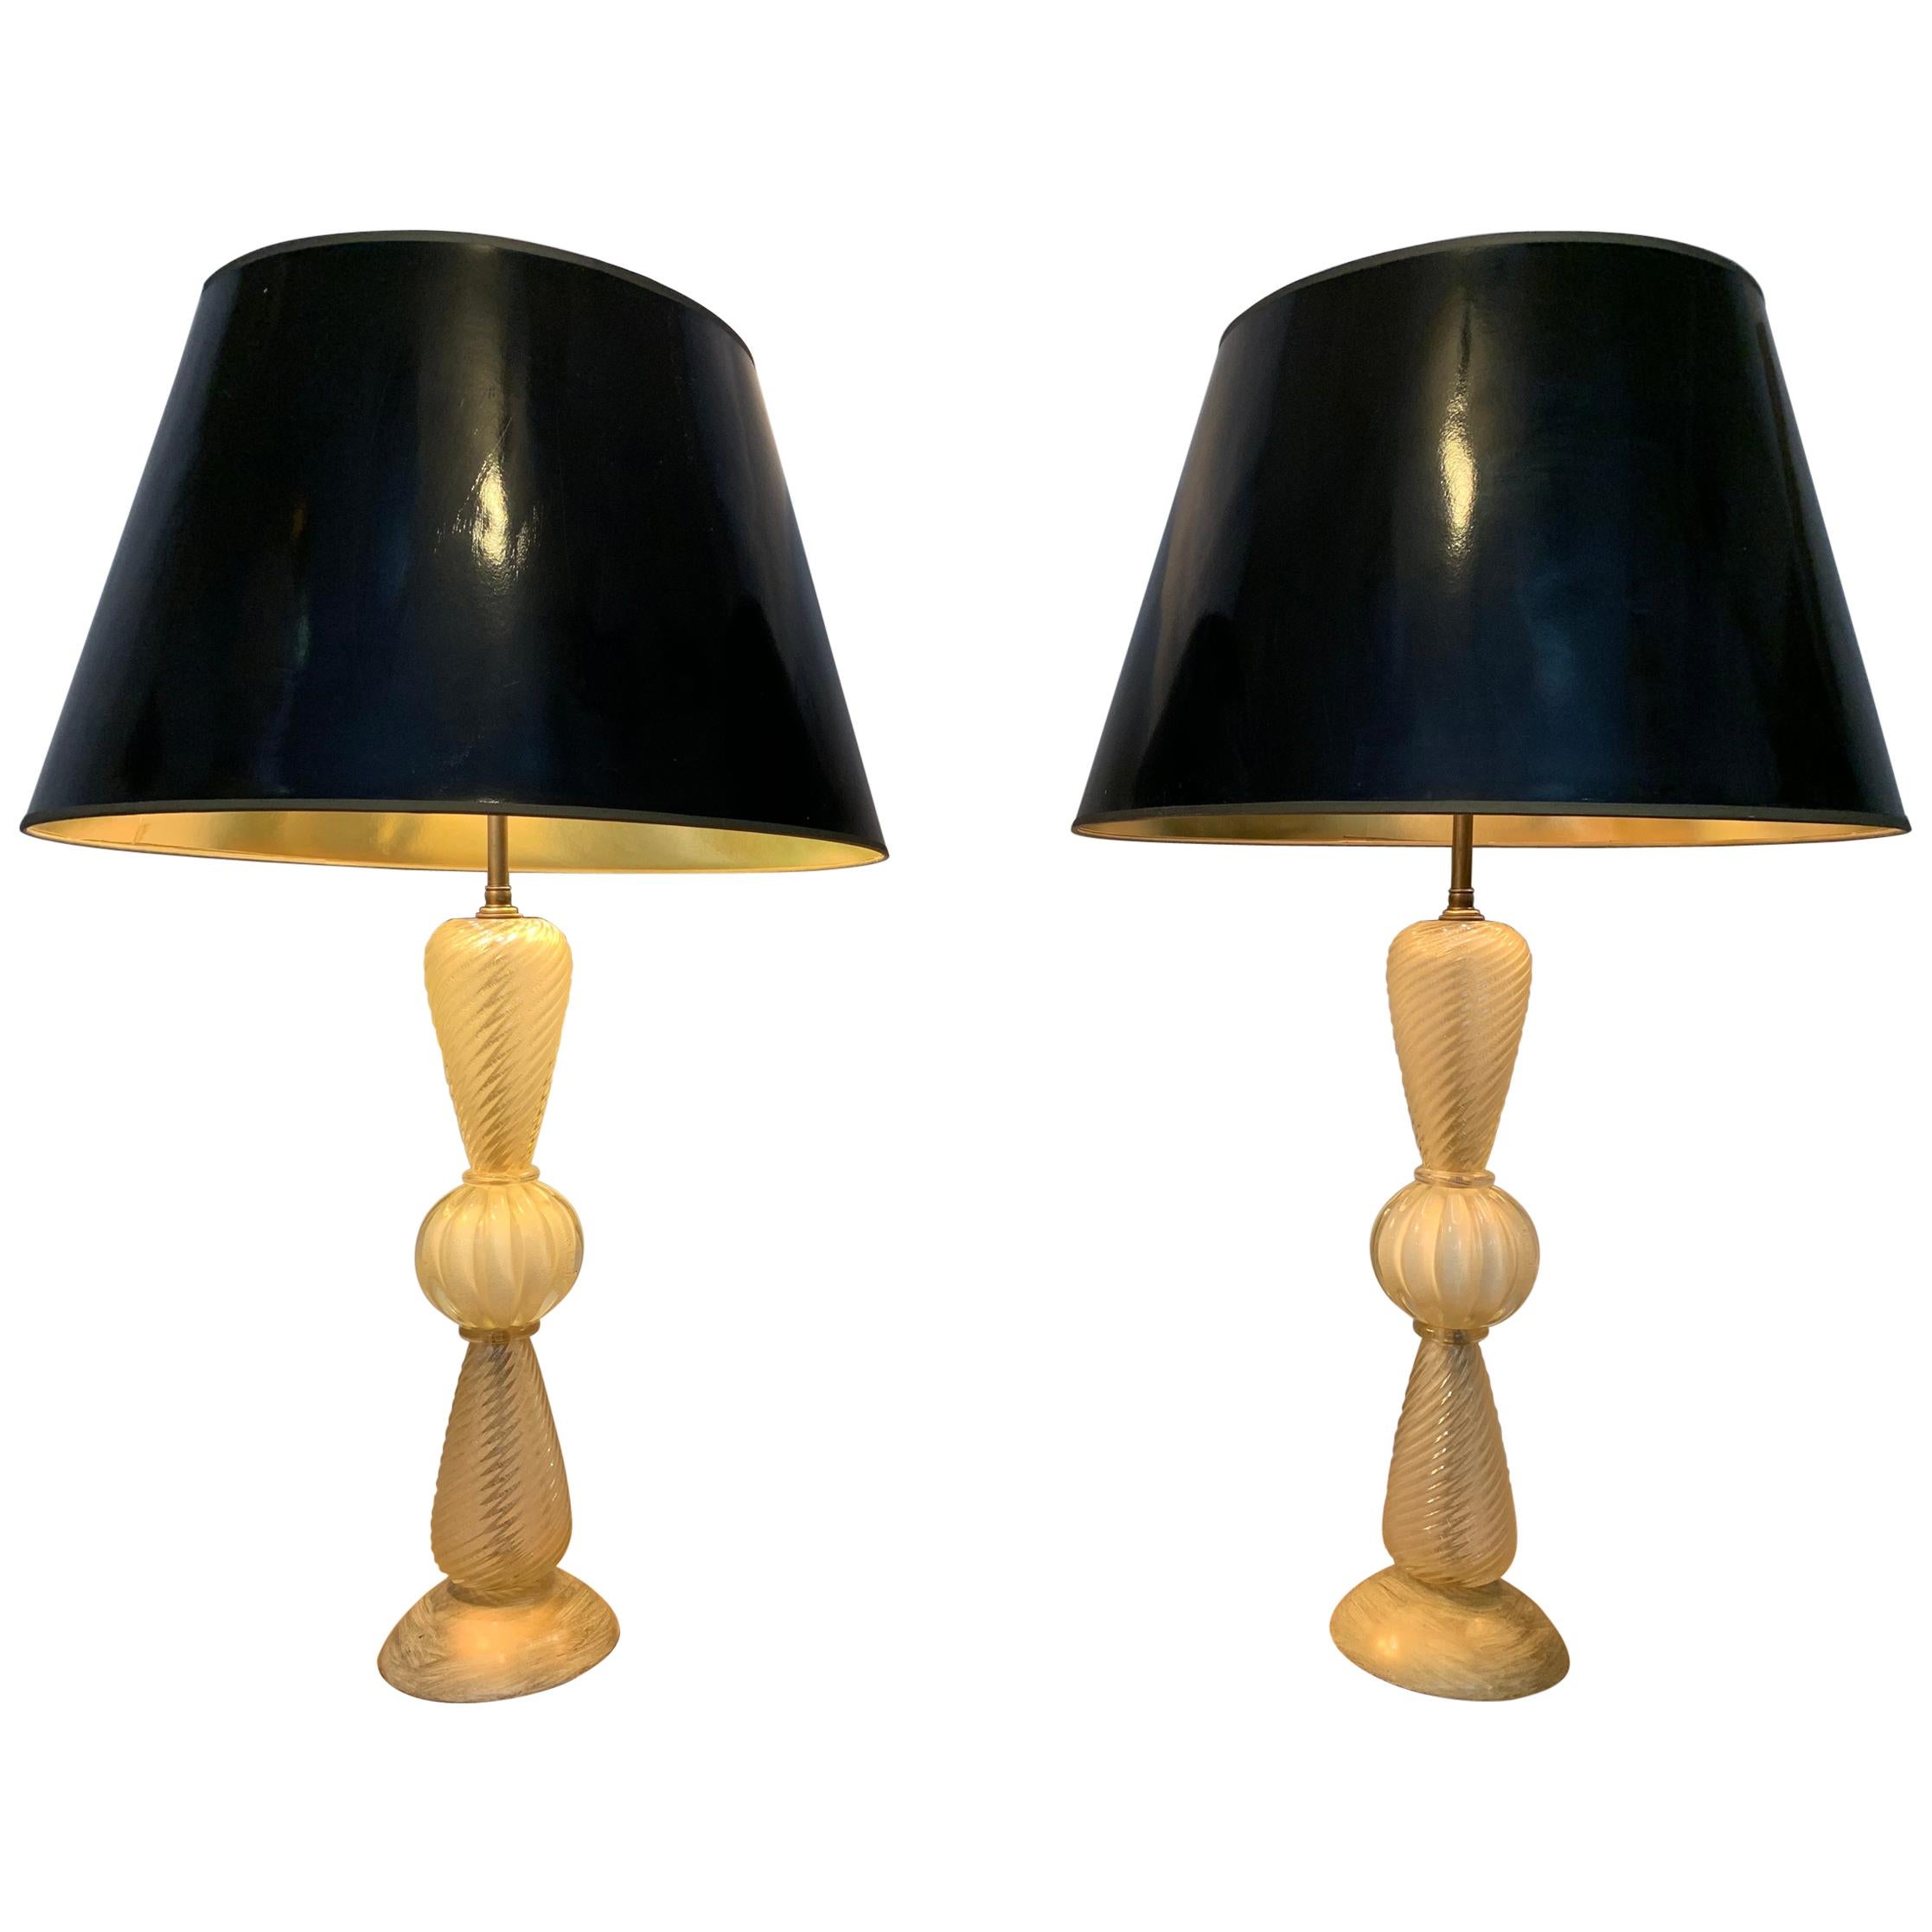 1950s Pair of Barovier & Toso Italian Murano Glass Table Lamps with Gold Flecks